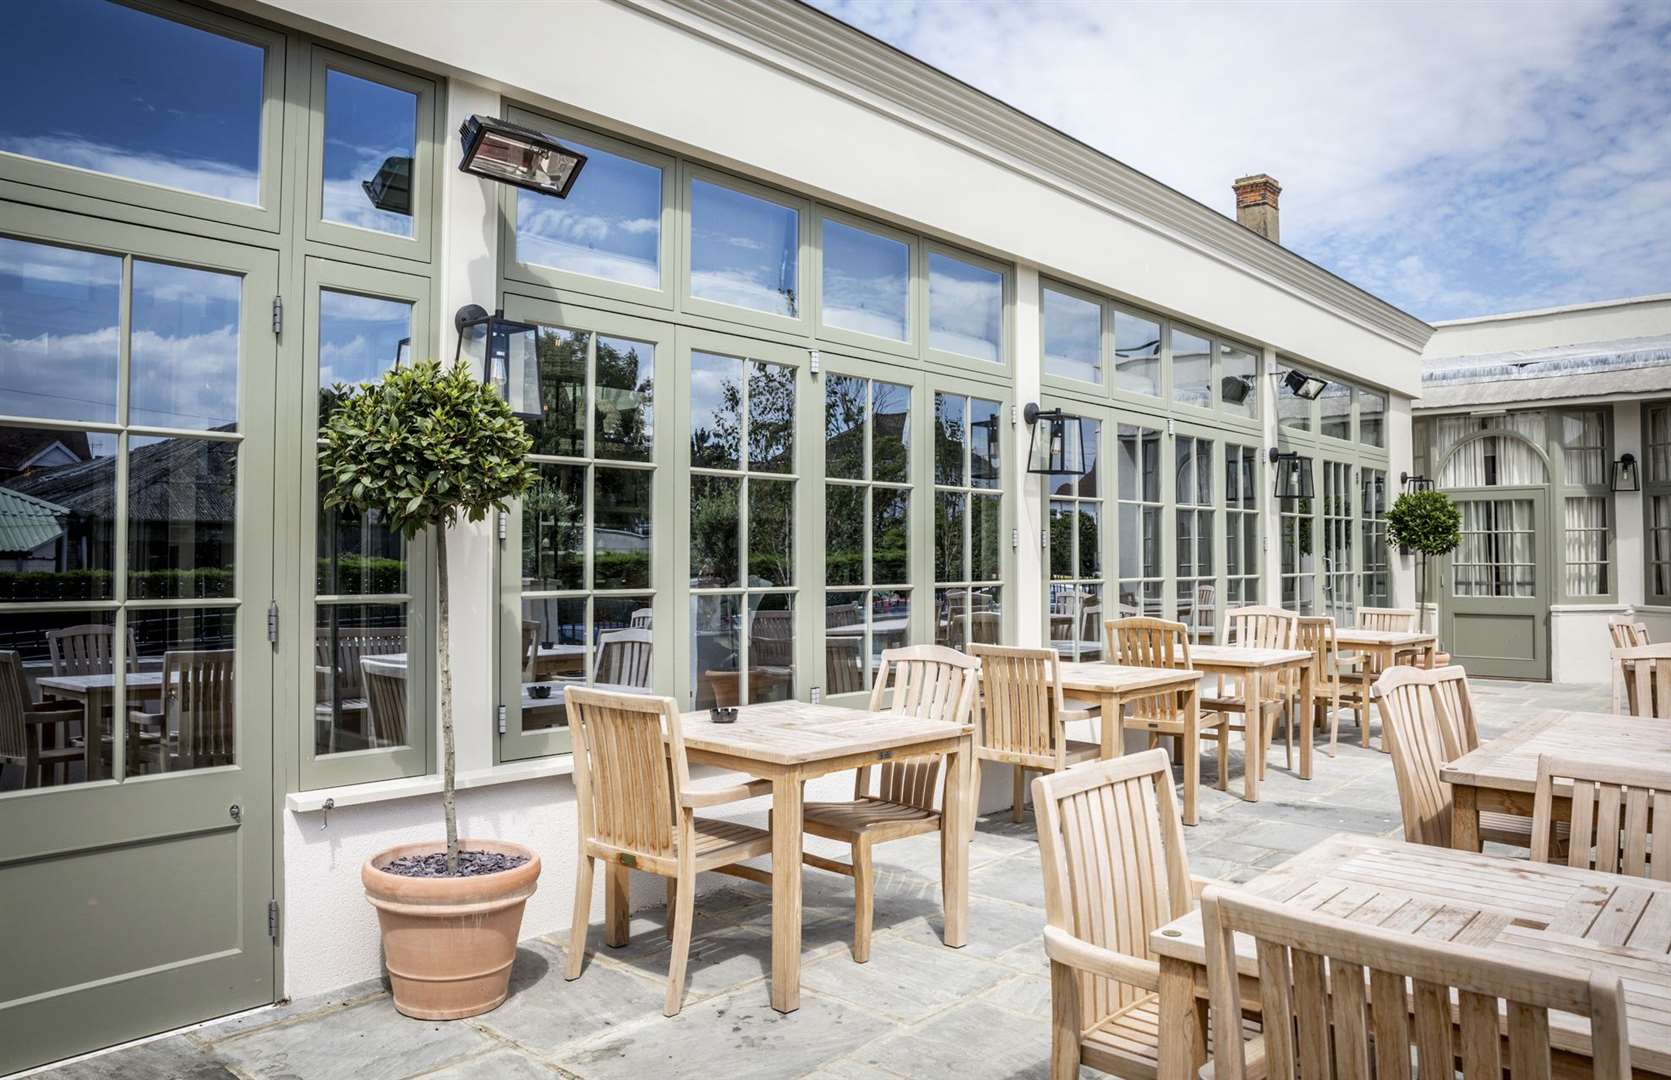 The outside seating area at The Marine Hotel Pic: Shepherd Neame